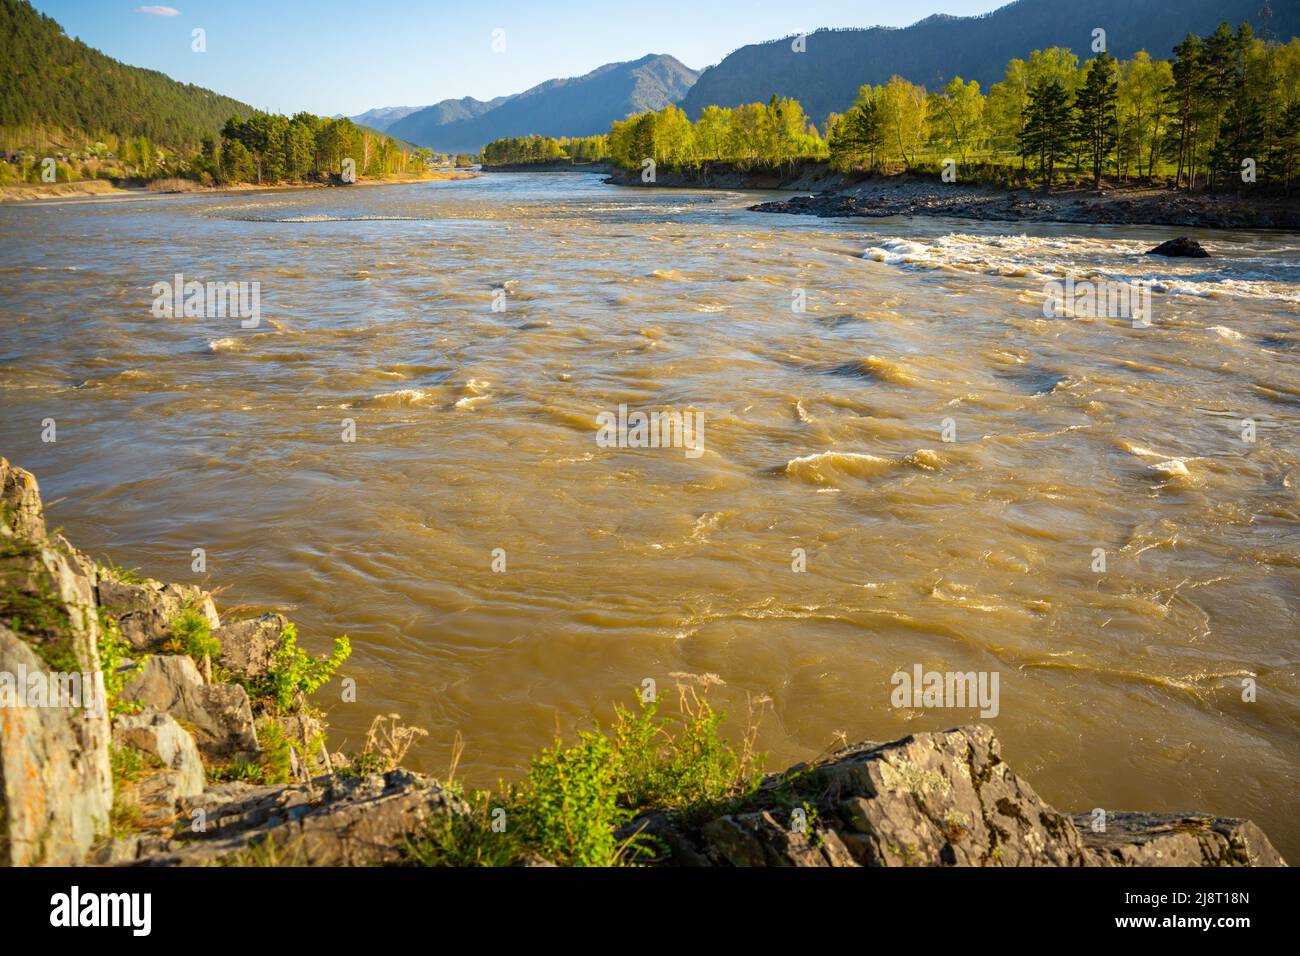 The Altay landscape with mountain river Katun and green rocks at spring time, Siberia, Altai Republic Stock Photo